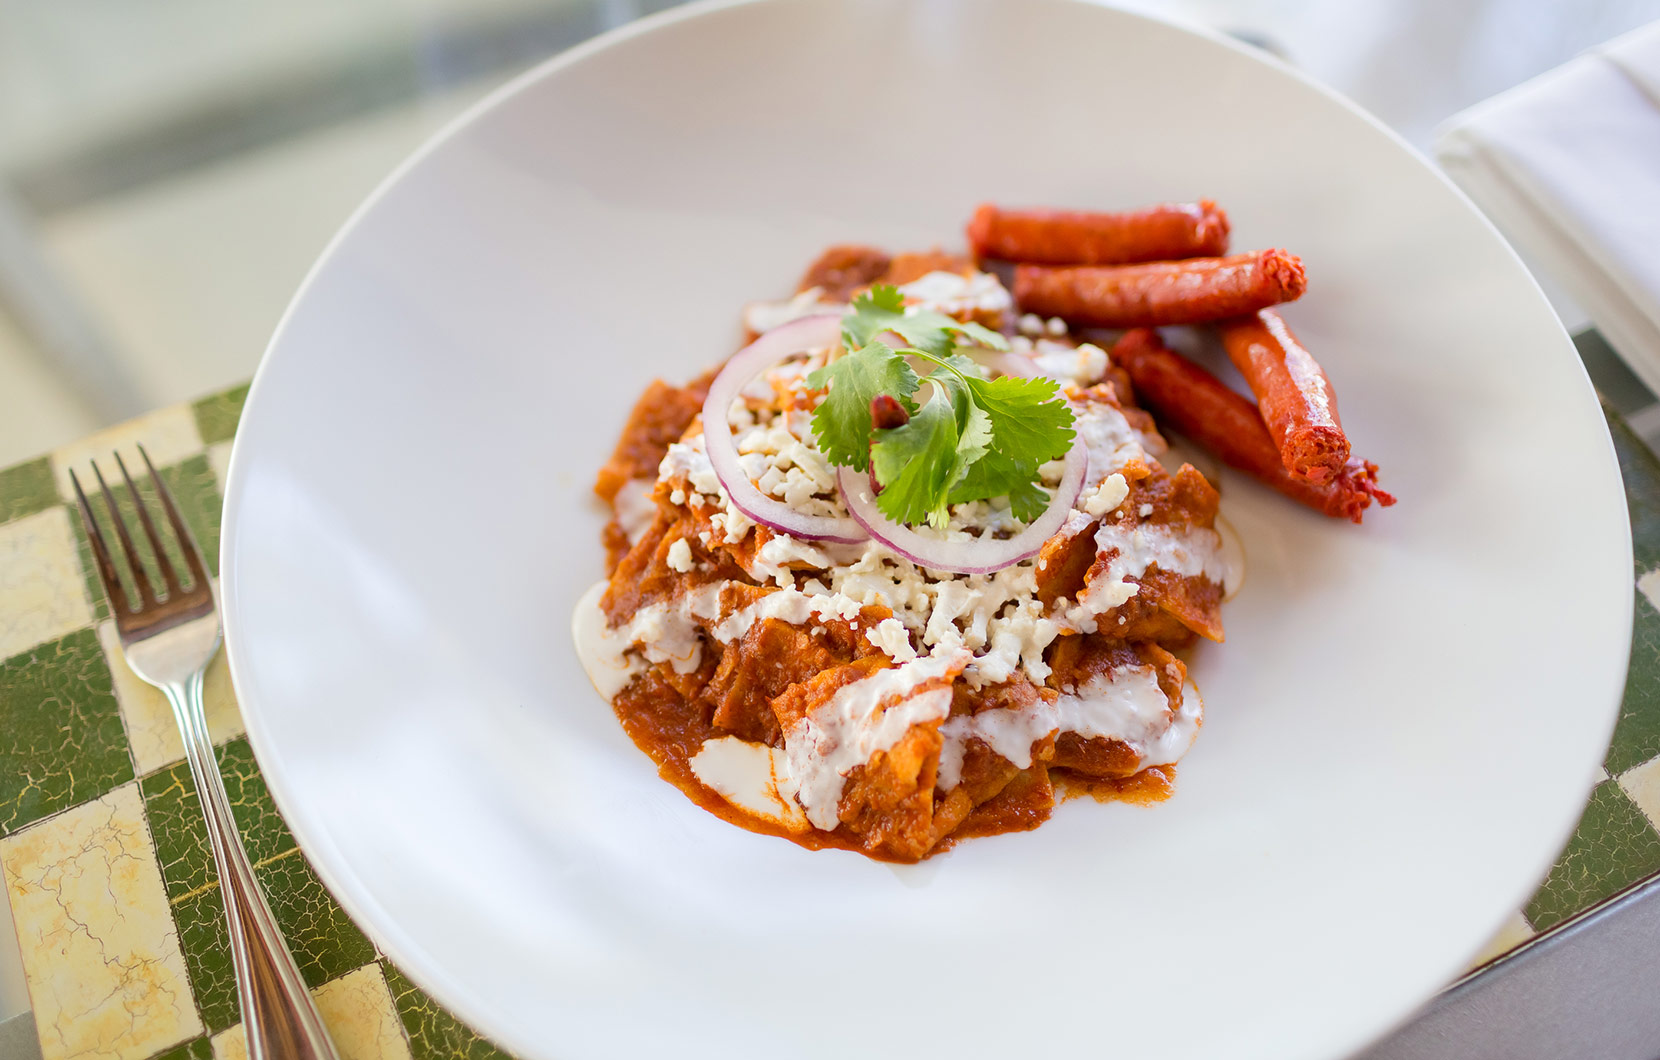 Red chilaquiles and spicy Merguez sausage.